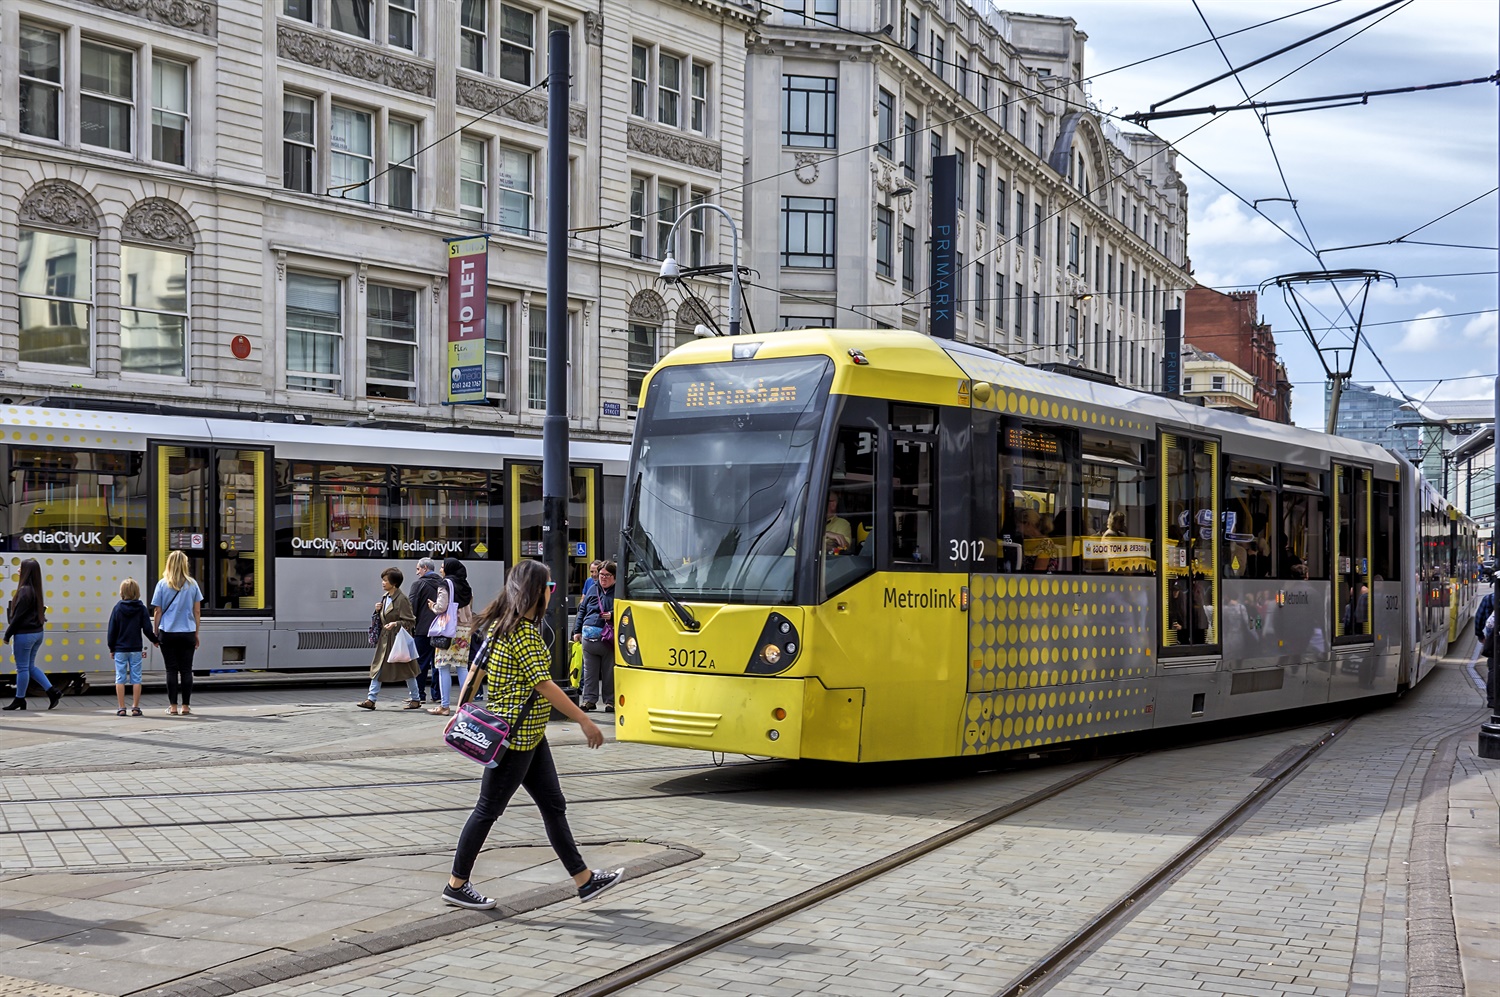 New Metrolink pass gives you unlimited journeys on all zones from Monday to Sunday, The Manc